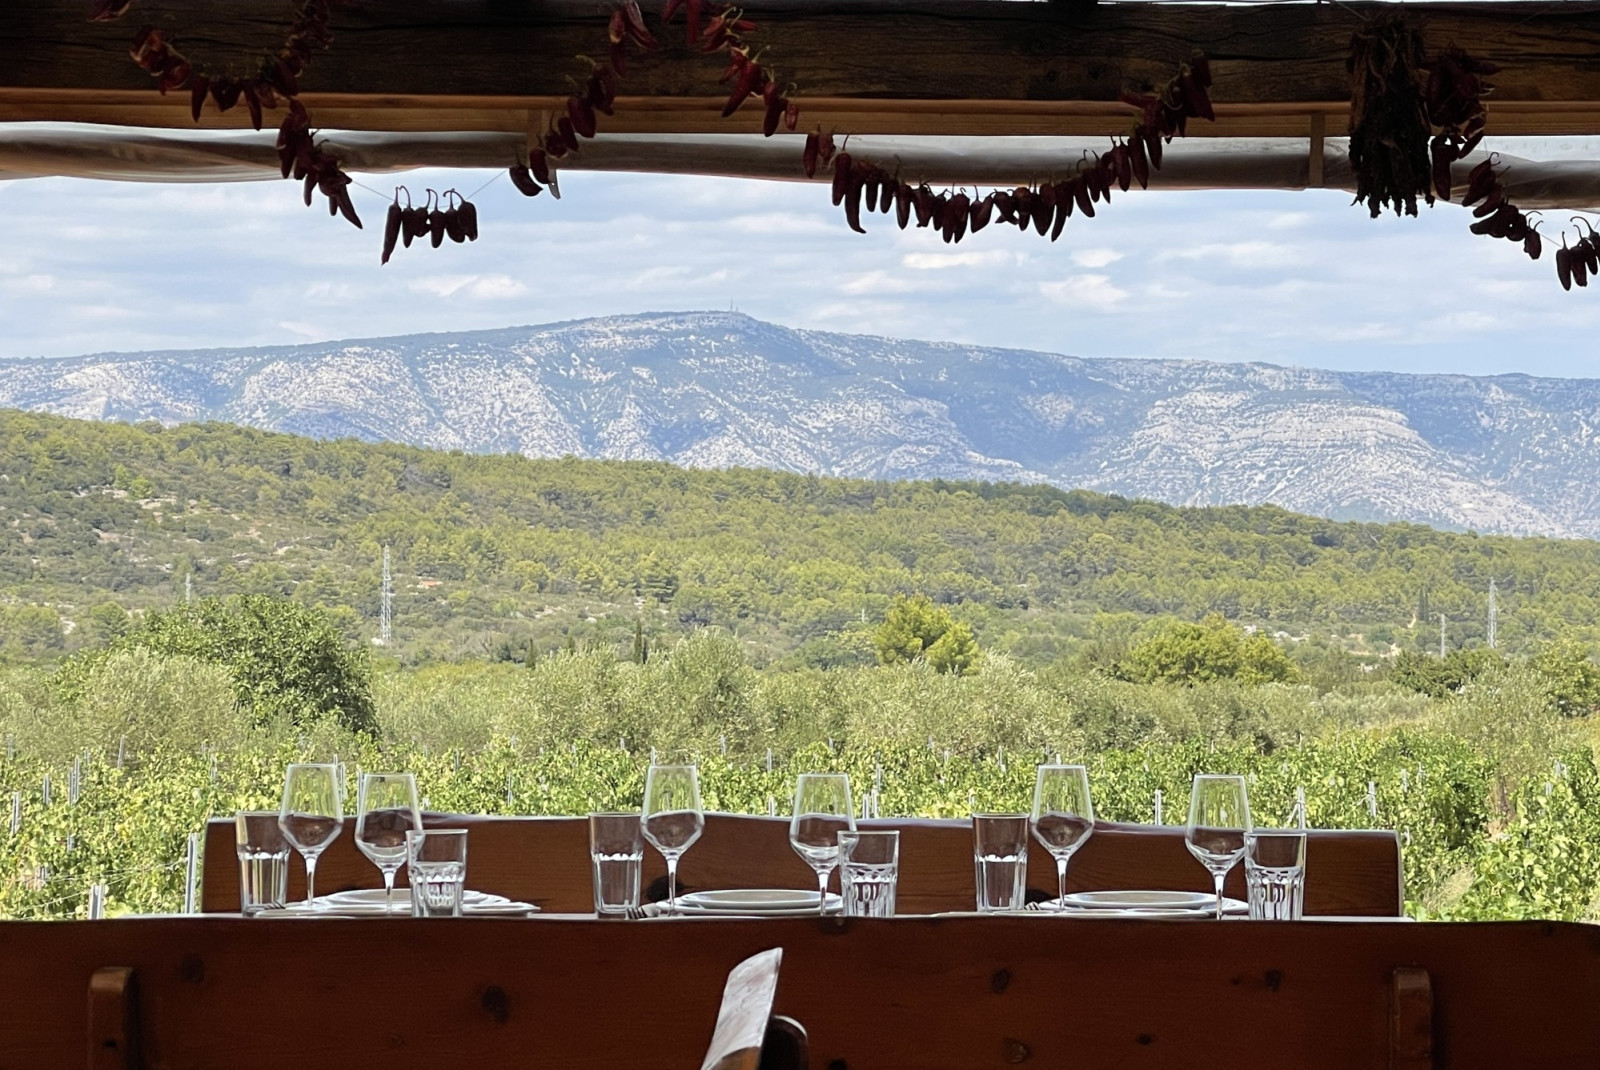 Winery with dining table setup overlooking mountains and valleys outside of Zagreb.